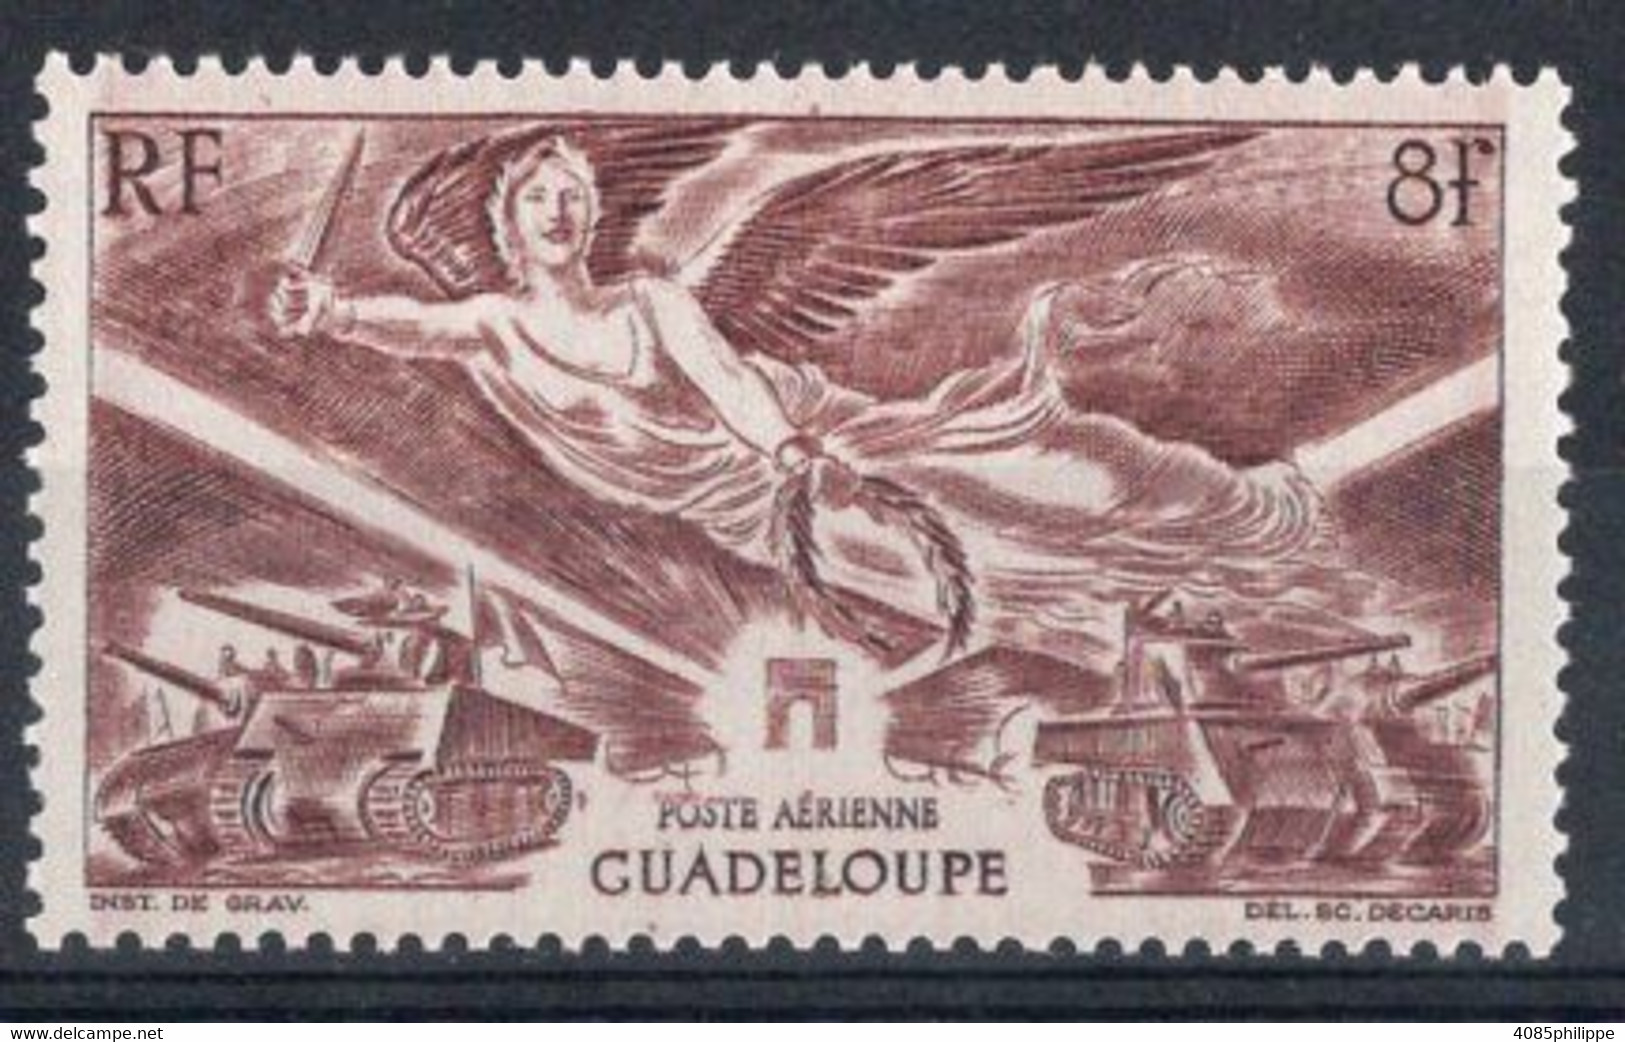 Guadeloupe Timbre-poste Aérienne N°6* Neuf Charnière TB Cote 1€25 - Luchtpost